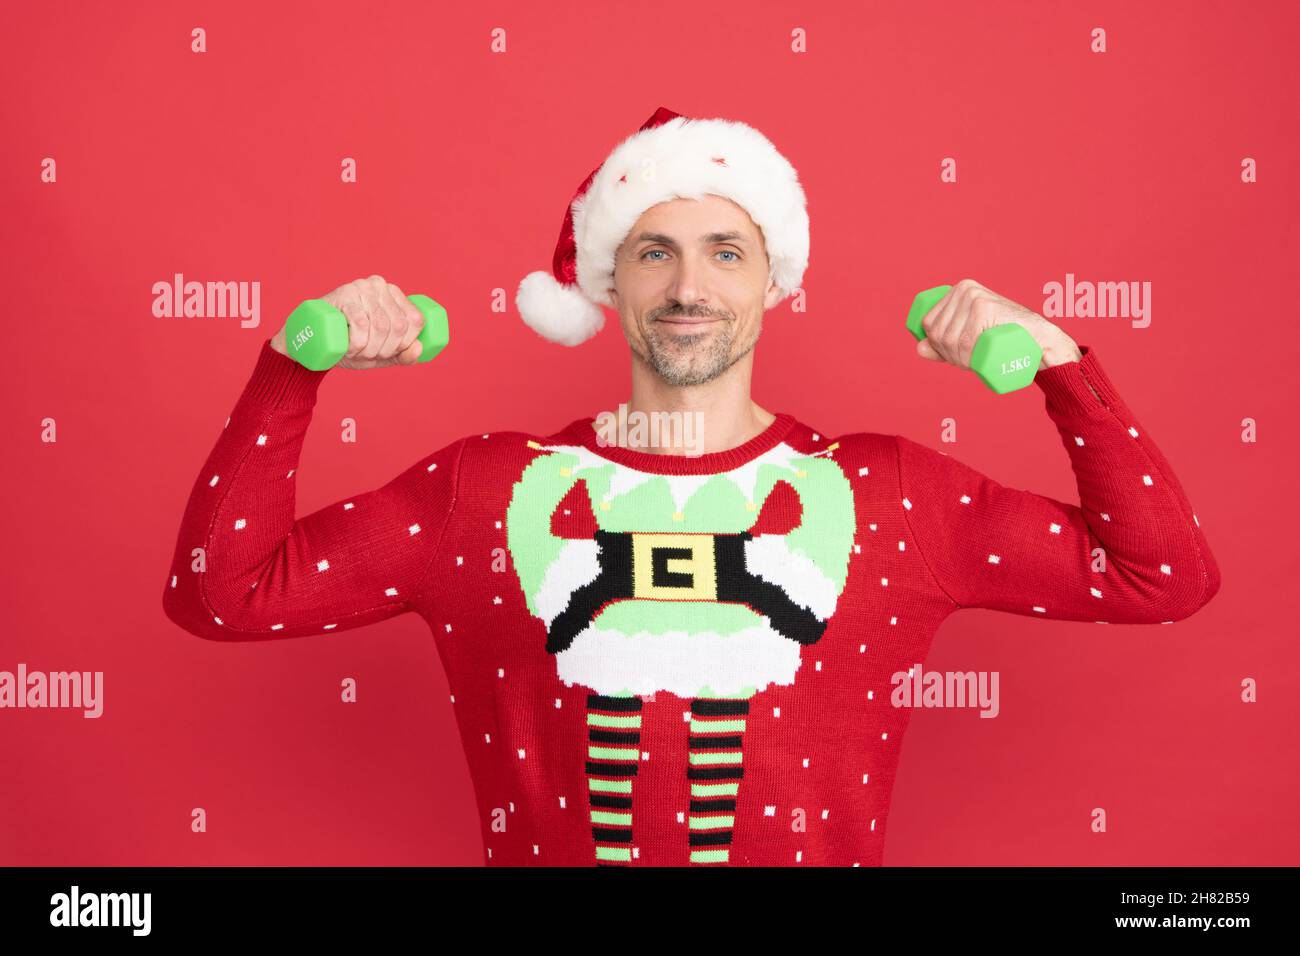 Happy Santa Claus man flex arms with hand weights doing dumbbell workout red background, Christmas Stock Photo